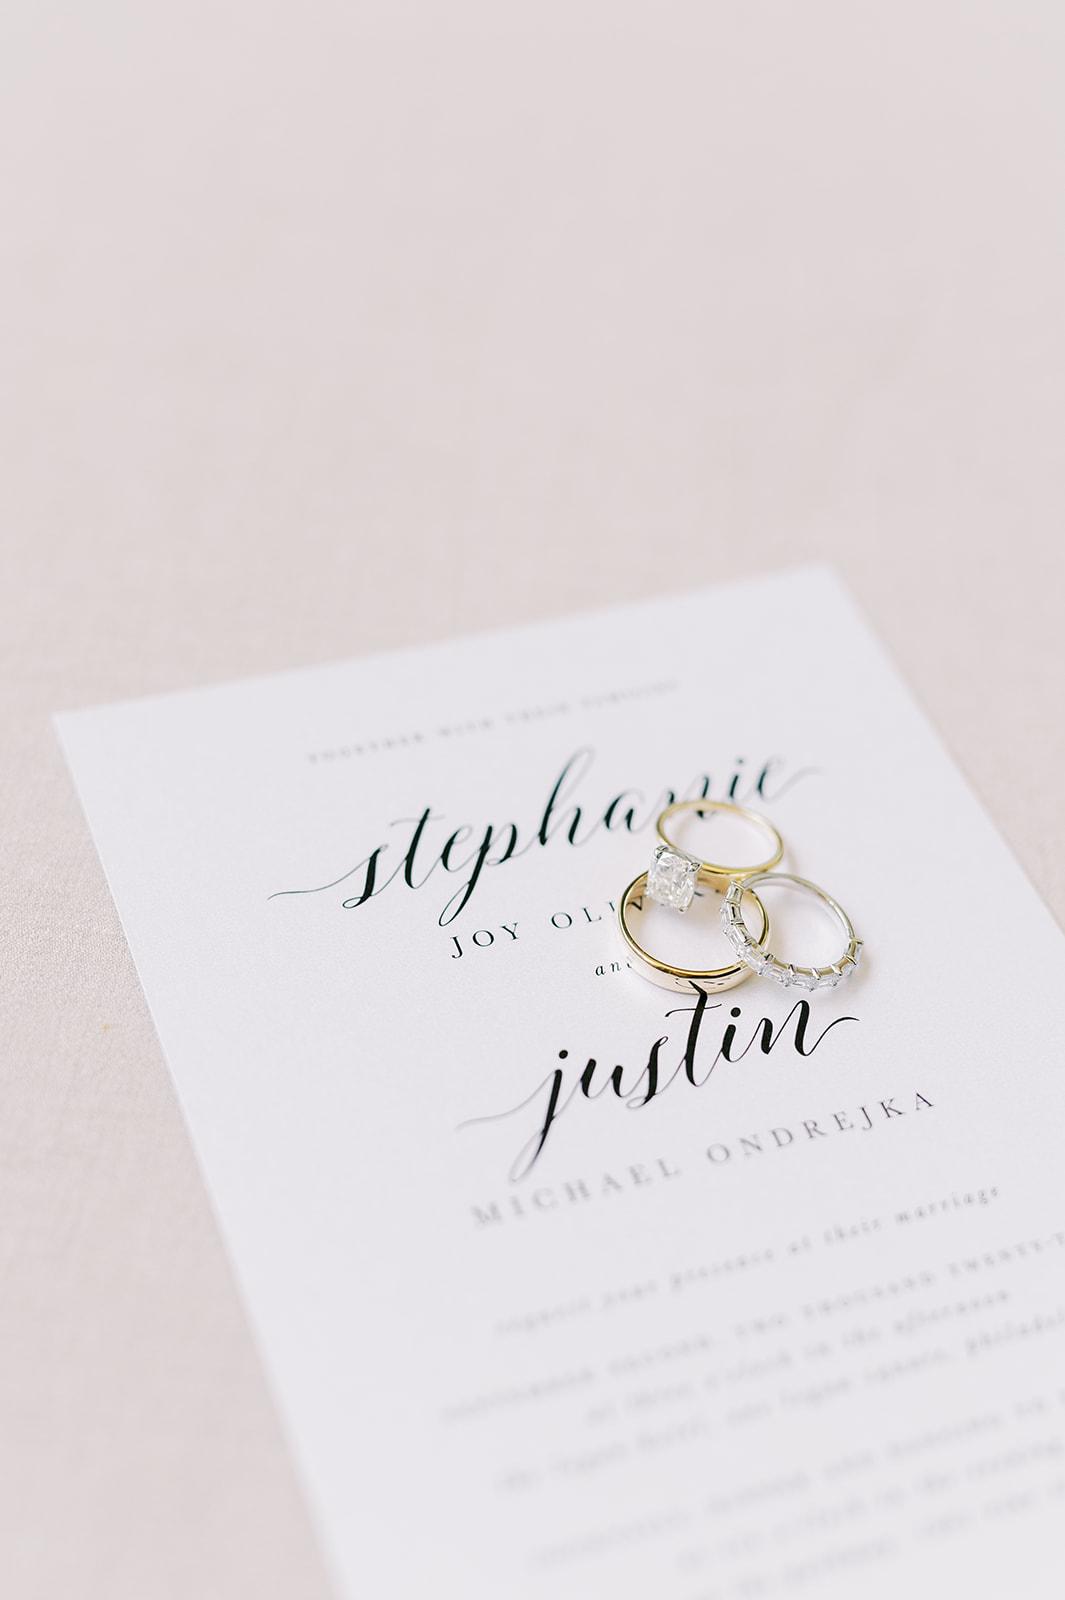 wedding rings sitting on simple and chic white and black wedding invitation